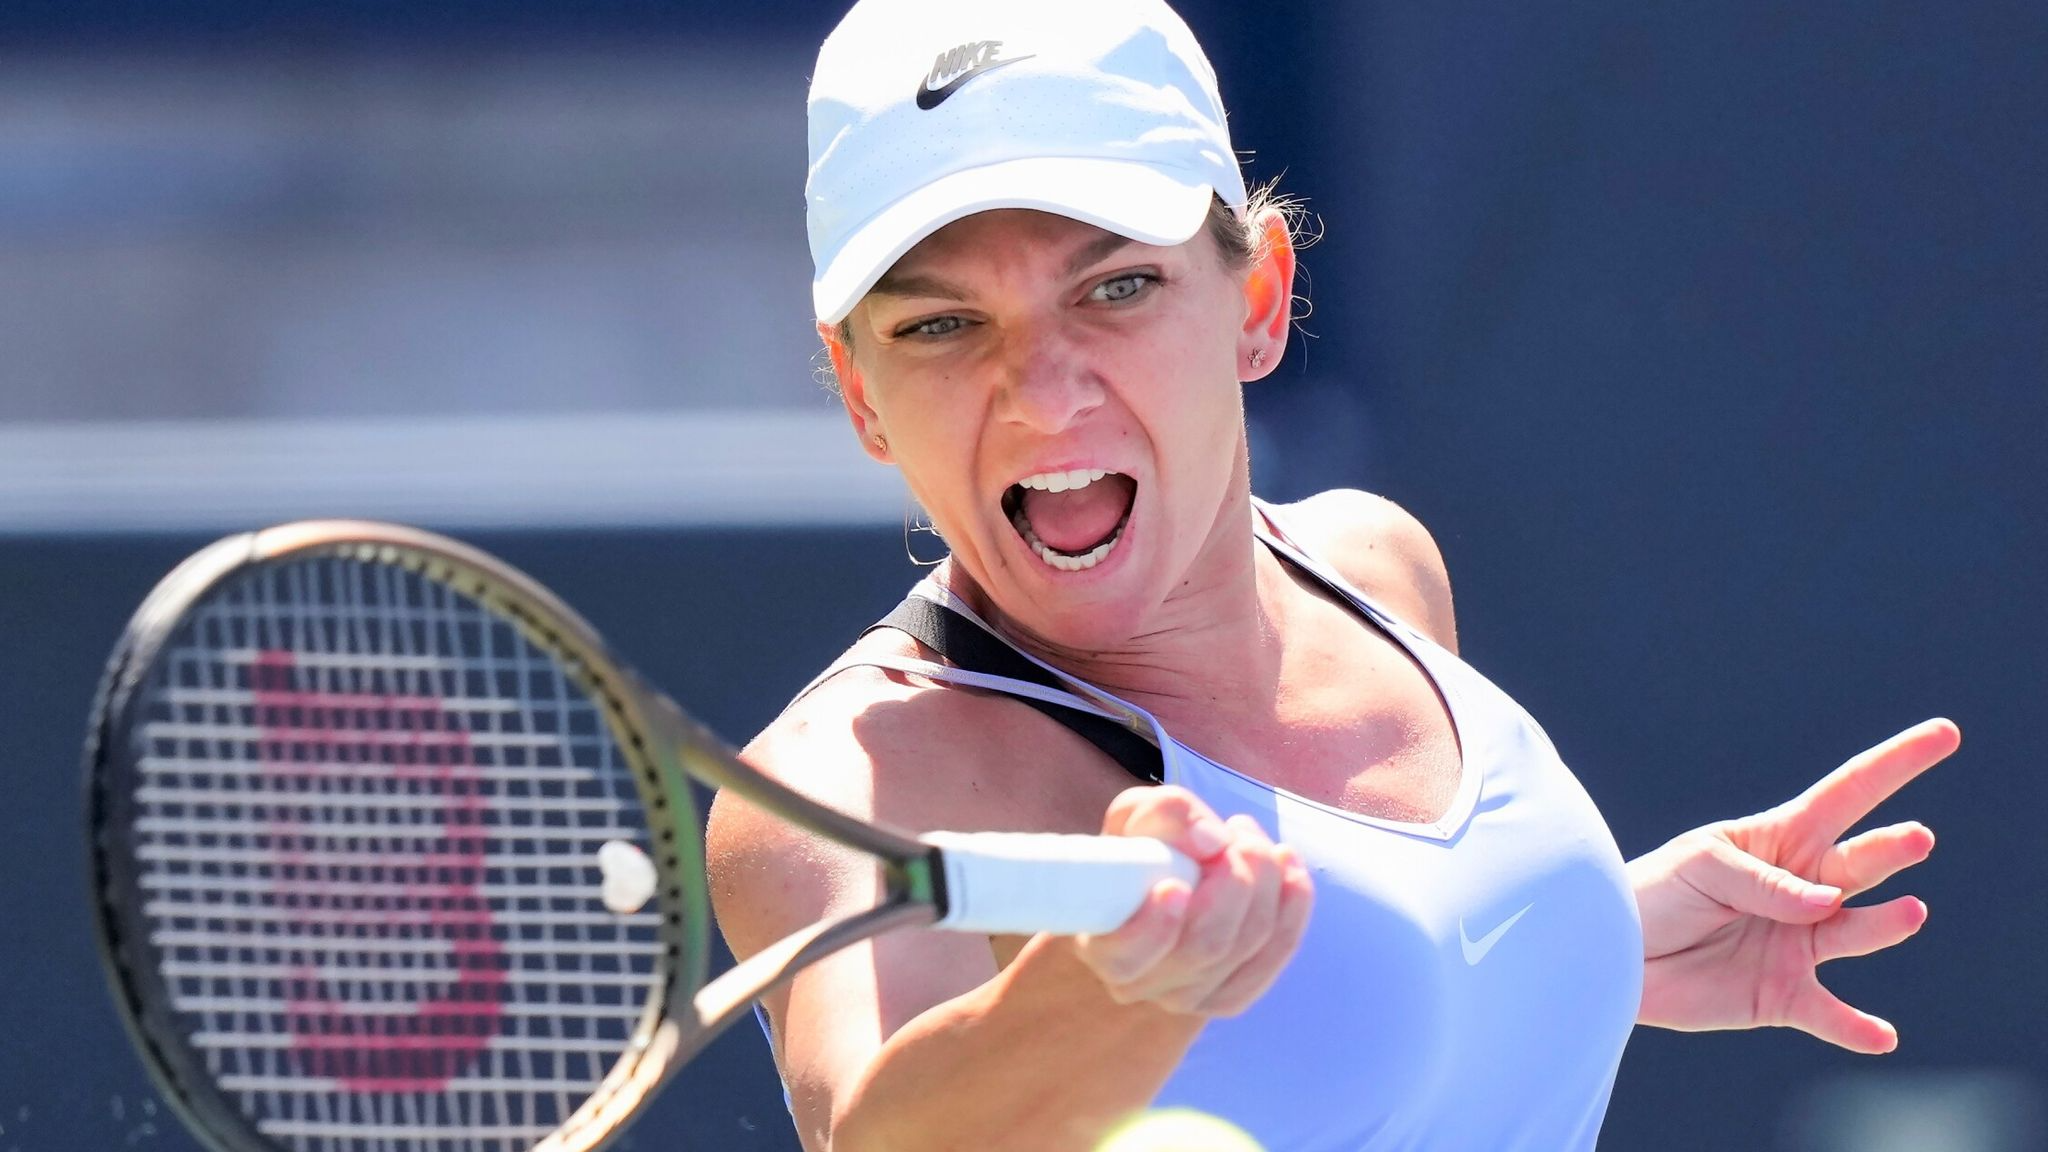 Tennis Player Halep Sues Manufacturer Of Biological Supplements After Doping Disqualification